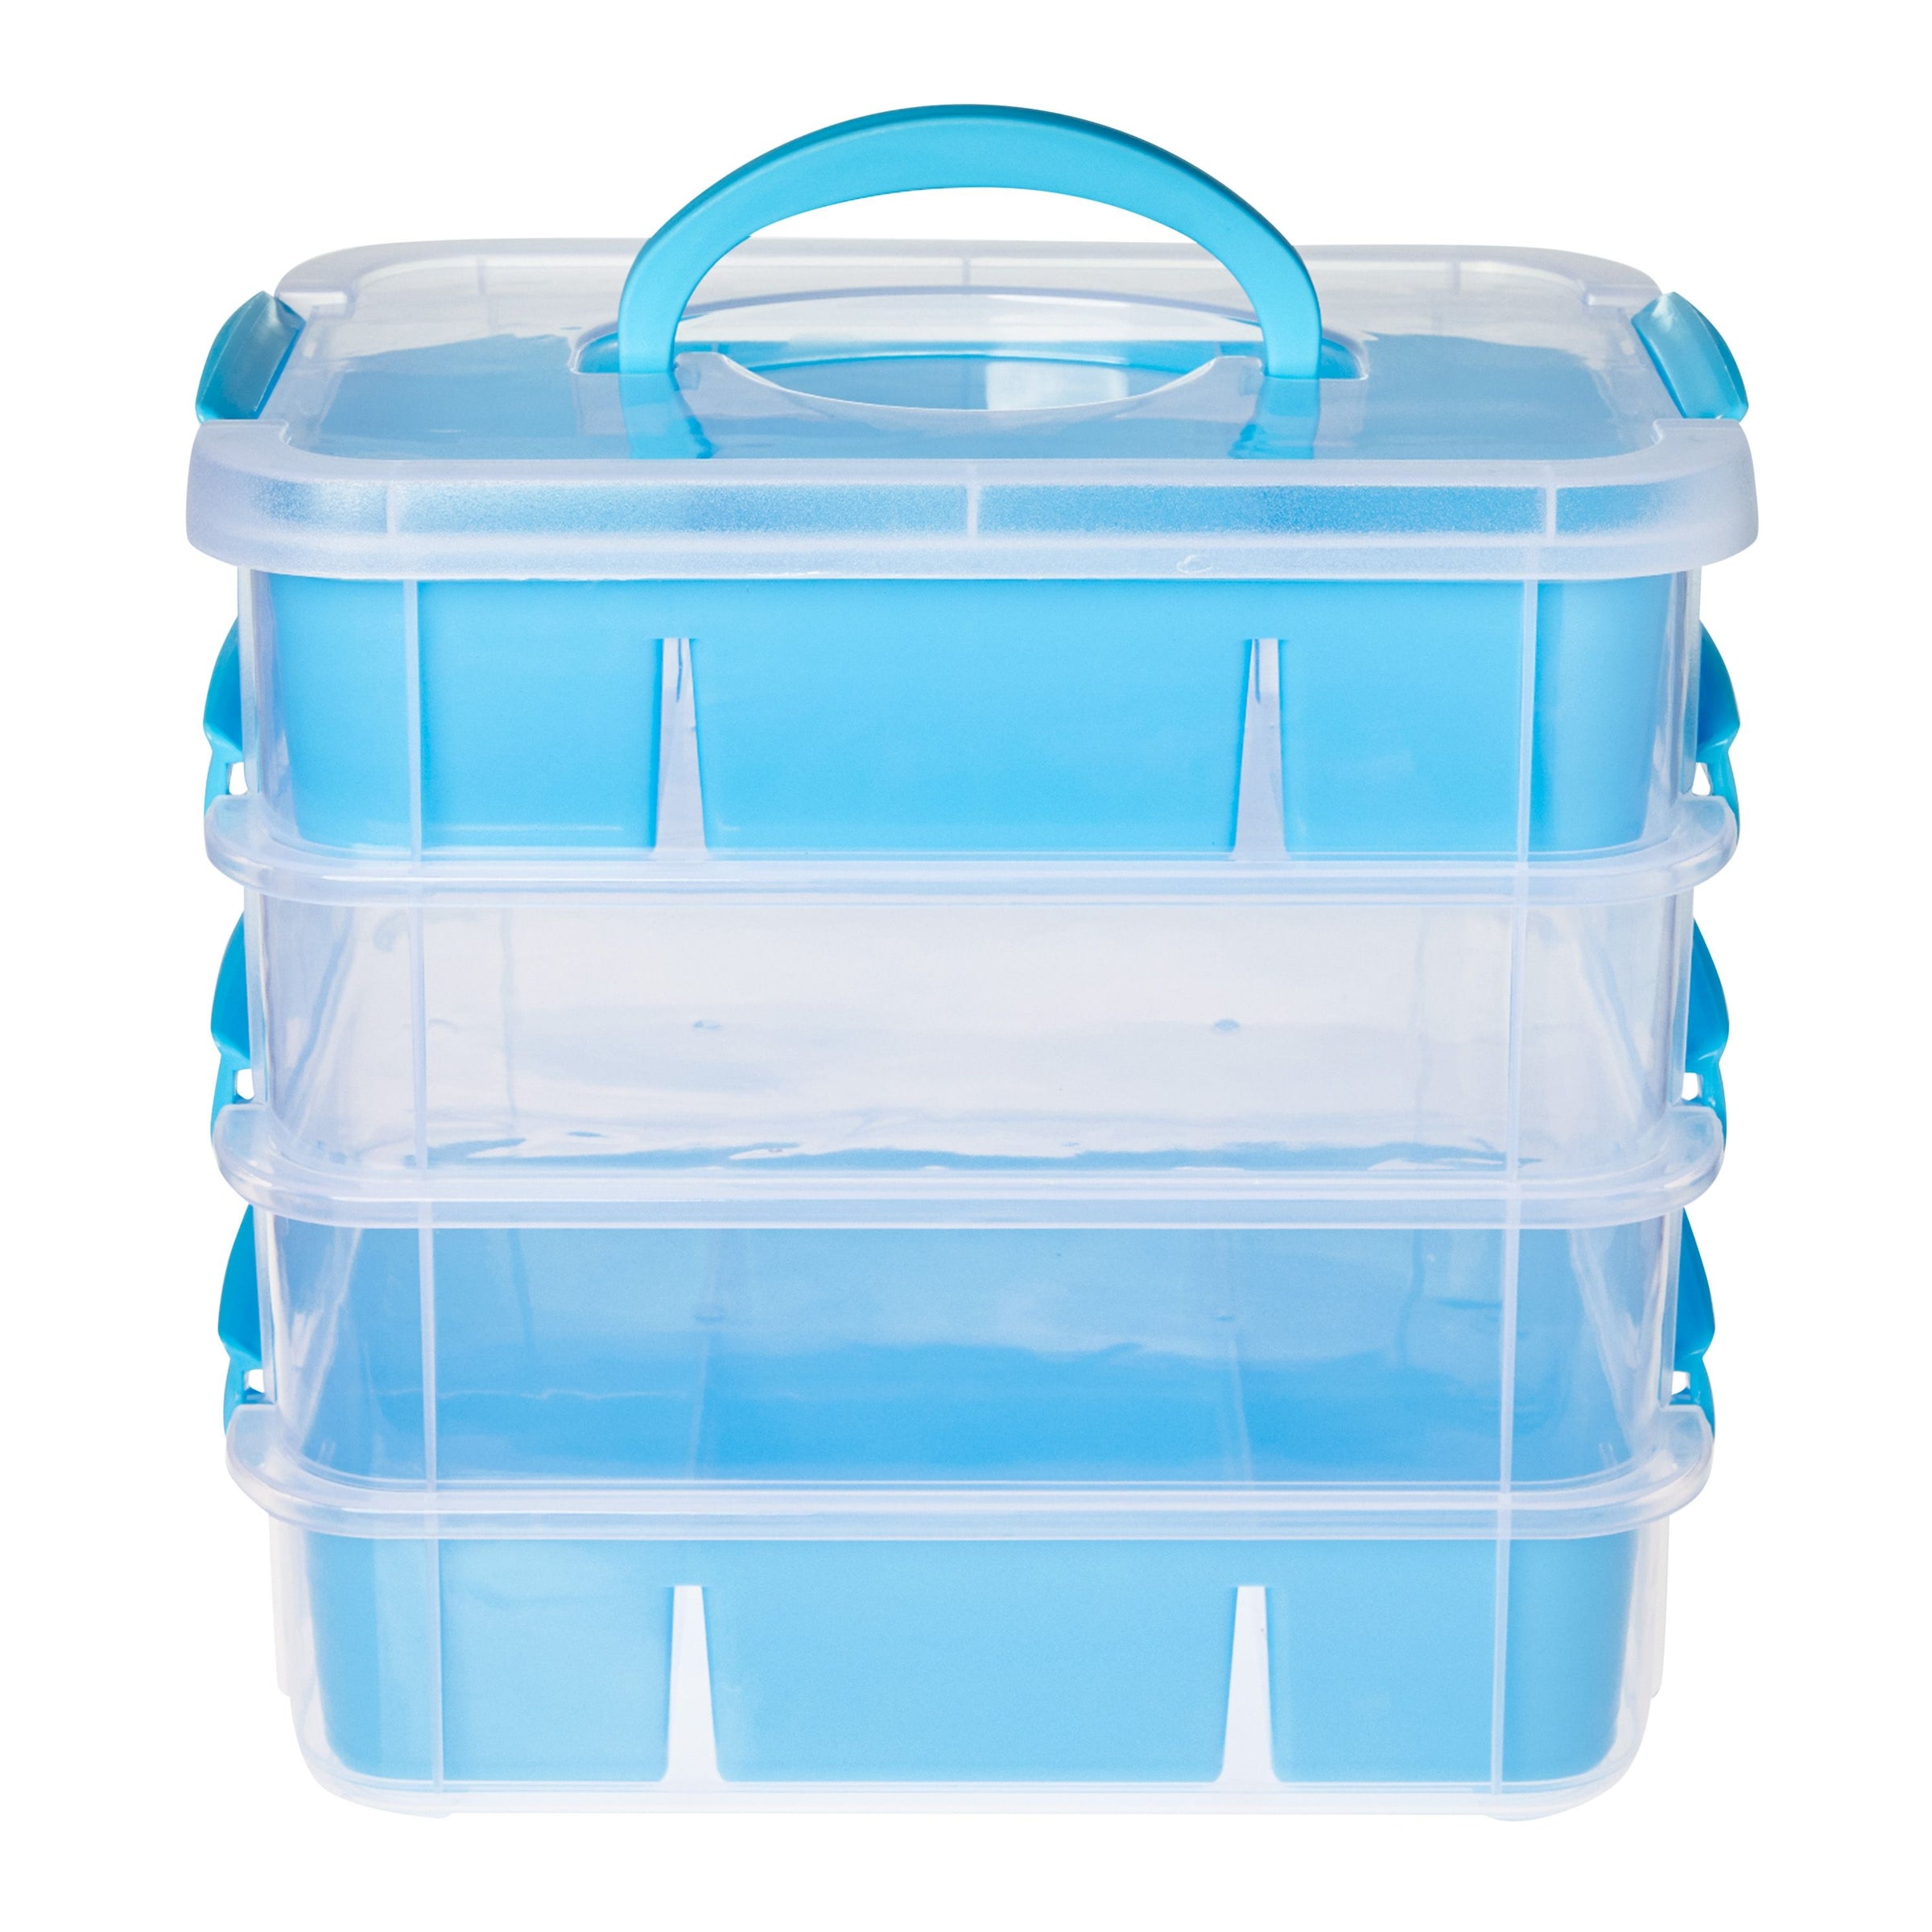 Stackable Blue Craft Storage Containers with 2 Trays and Labels, Plast –  BrightCreationsOfficial